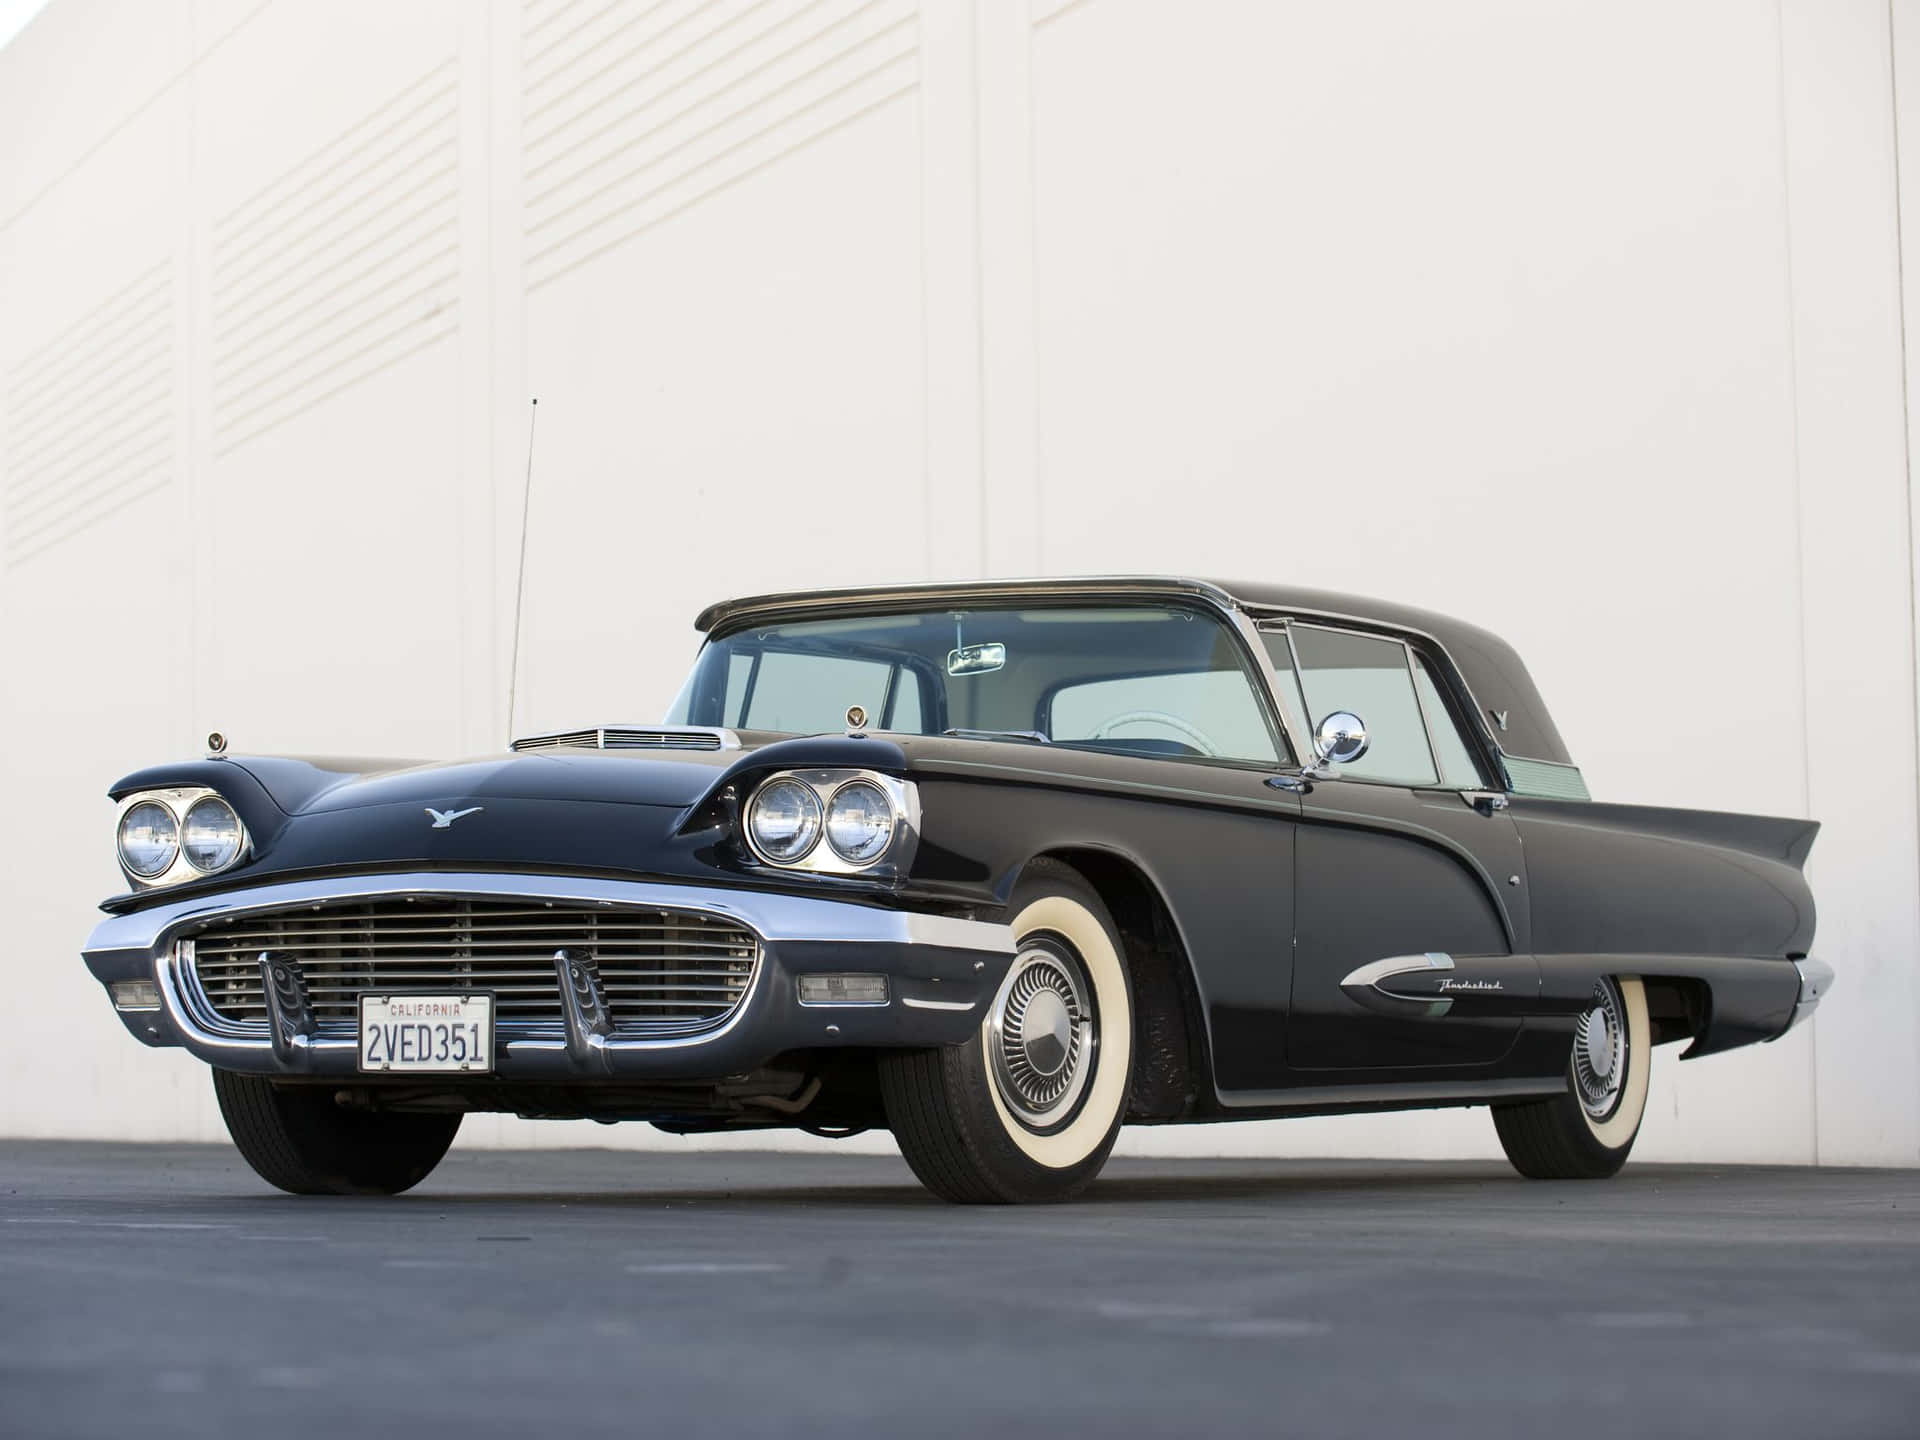 Classic Ford Thunderbird on the open road Wallpaper